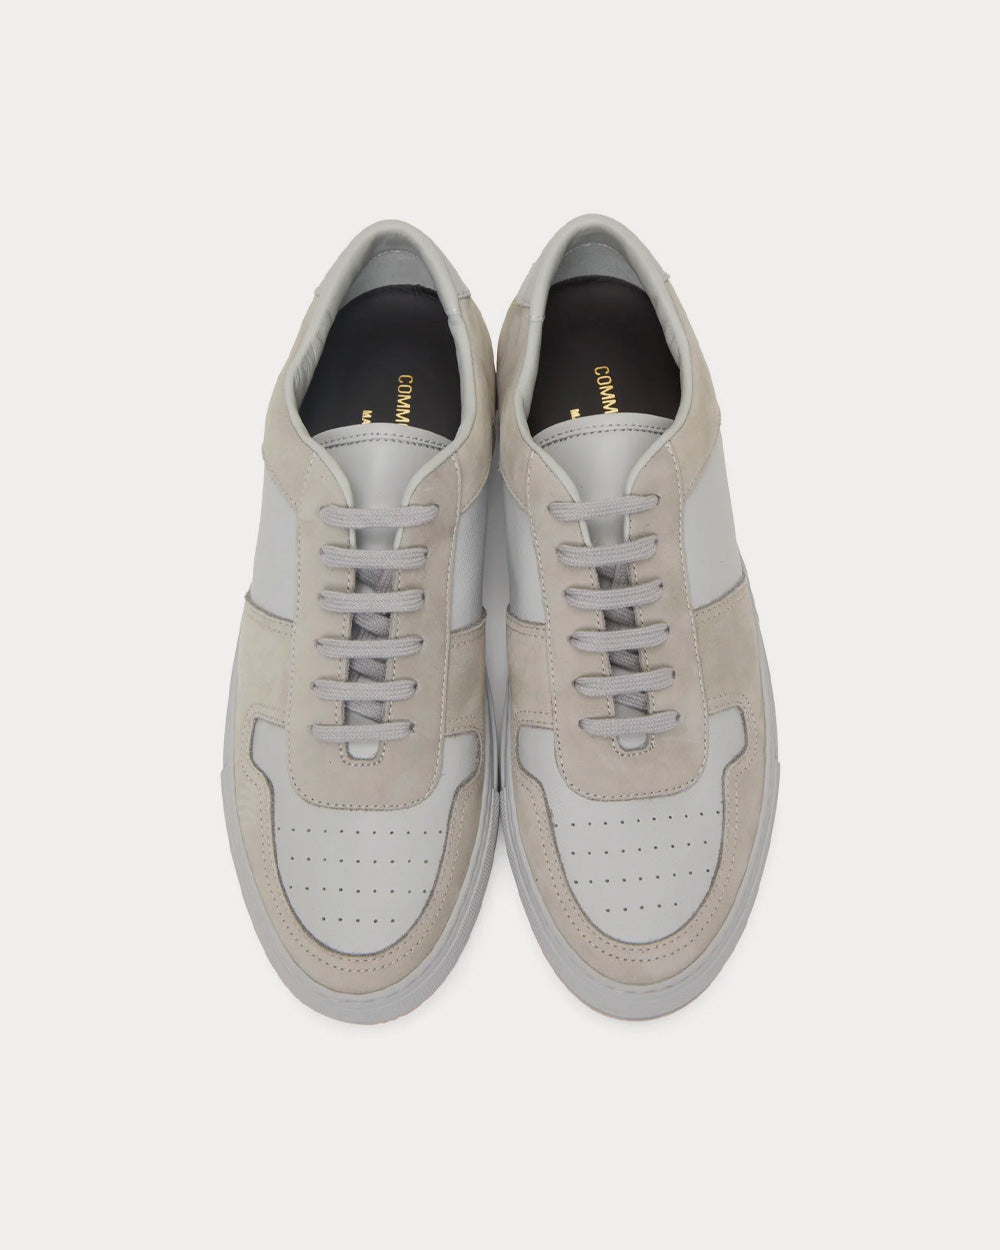 Common Projects - BBall Leather Grey Low Top Sneakers